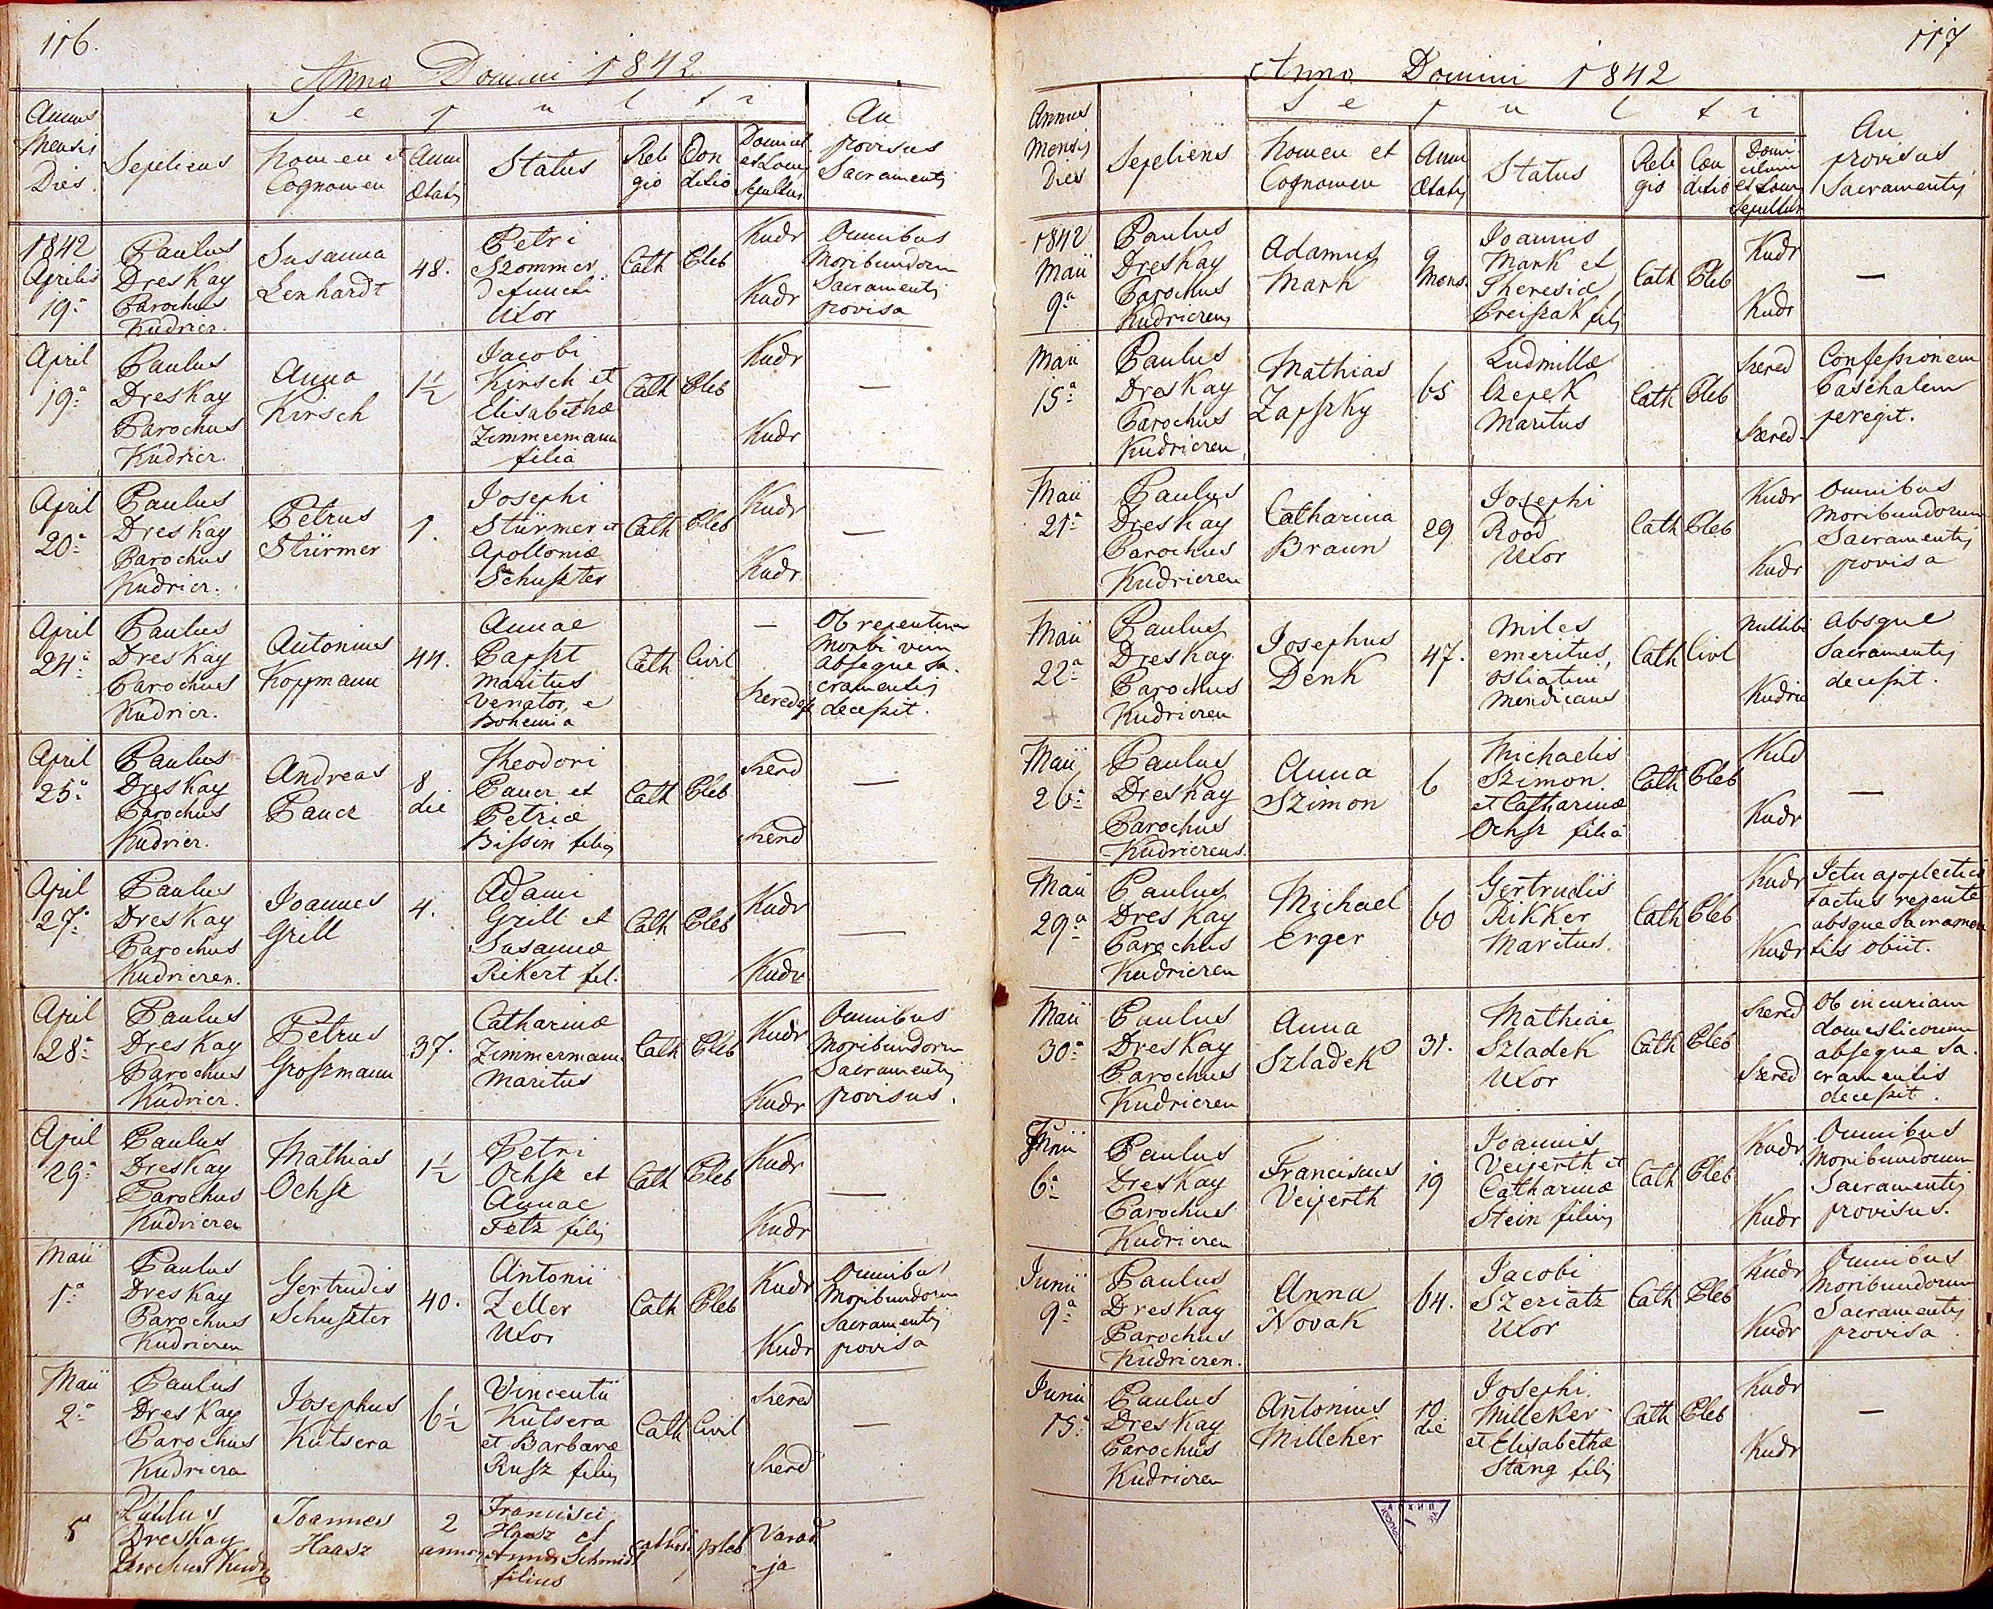 images/church_records/DEATHS/1829-1851D/116 i 117